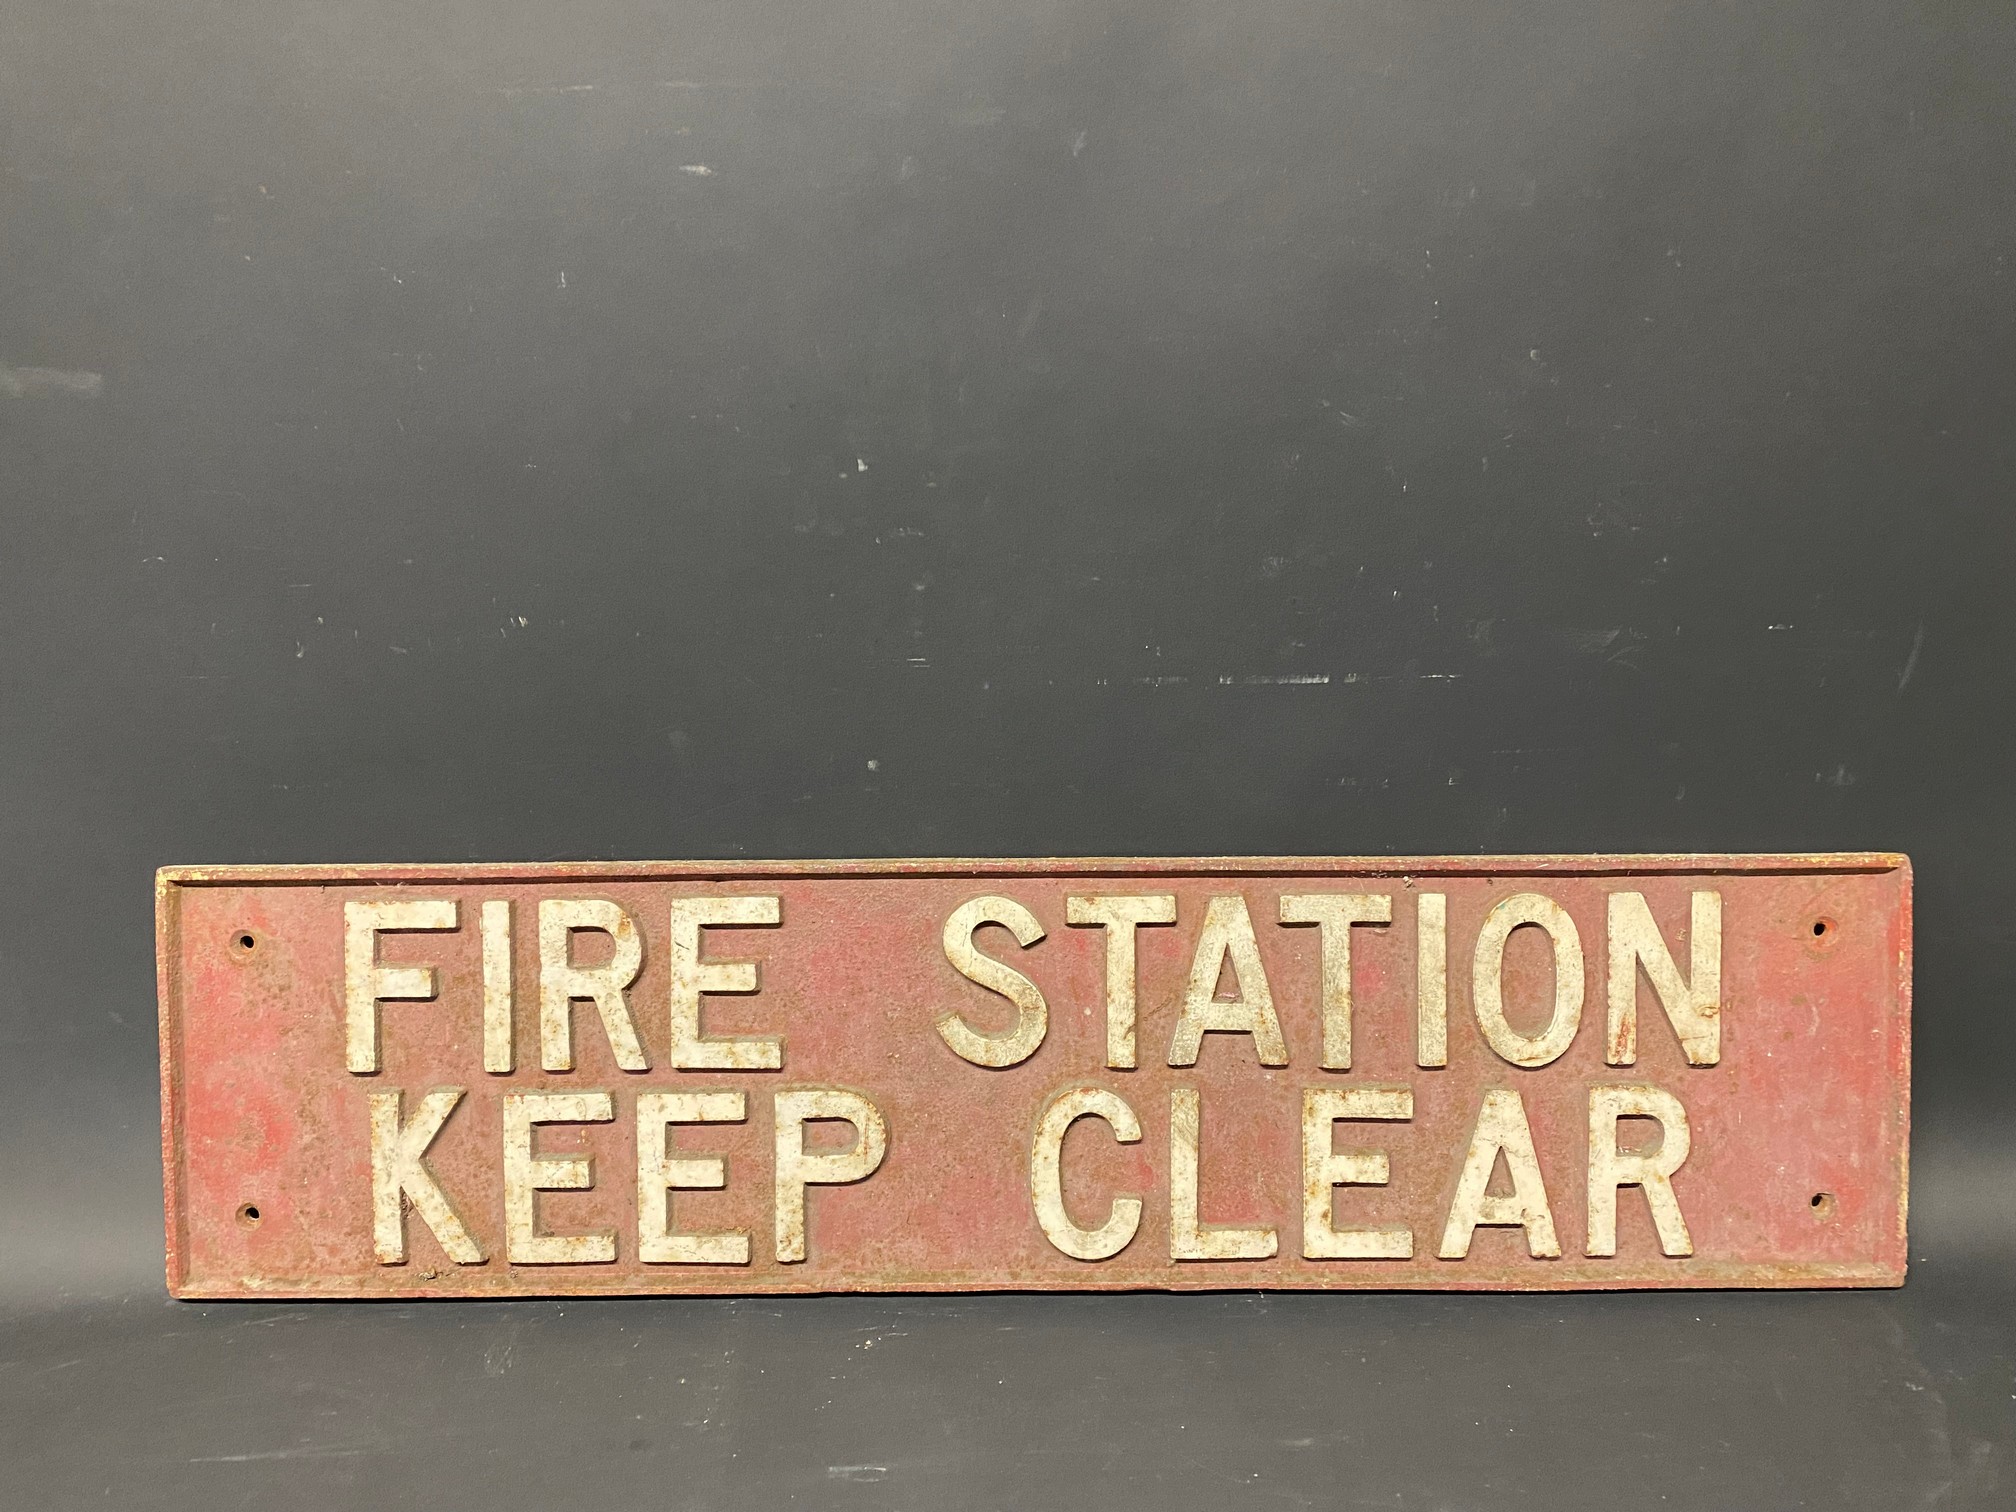 A Fire Station Keep Clear cast iron sign, 30 1/2 x 7 1/2".